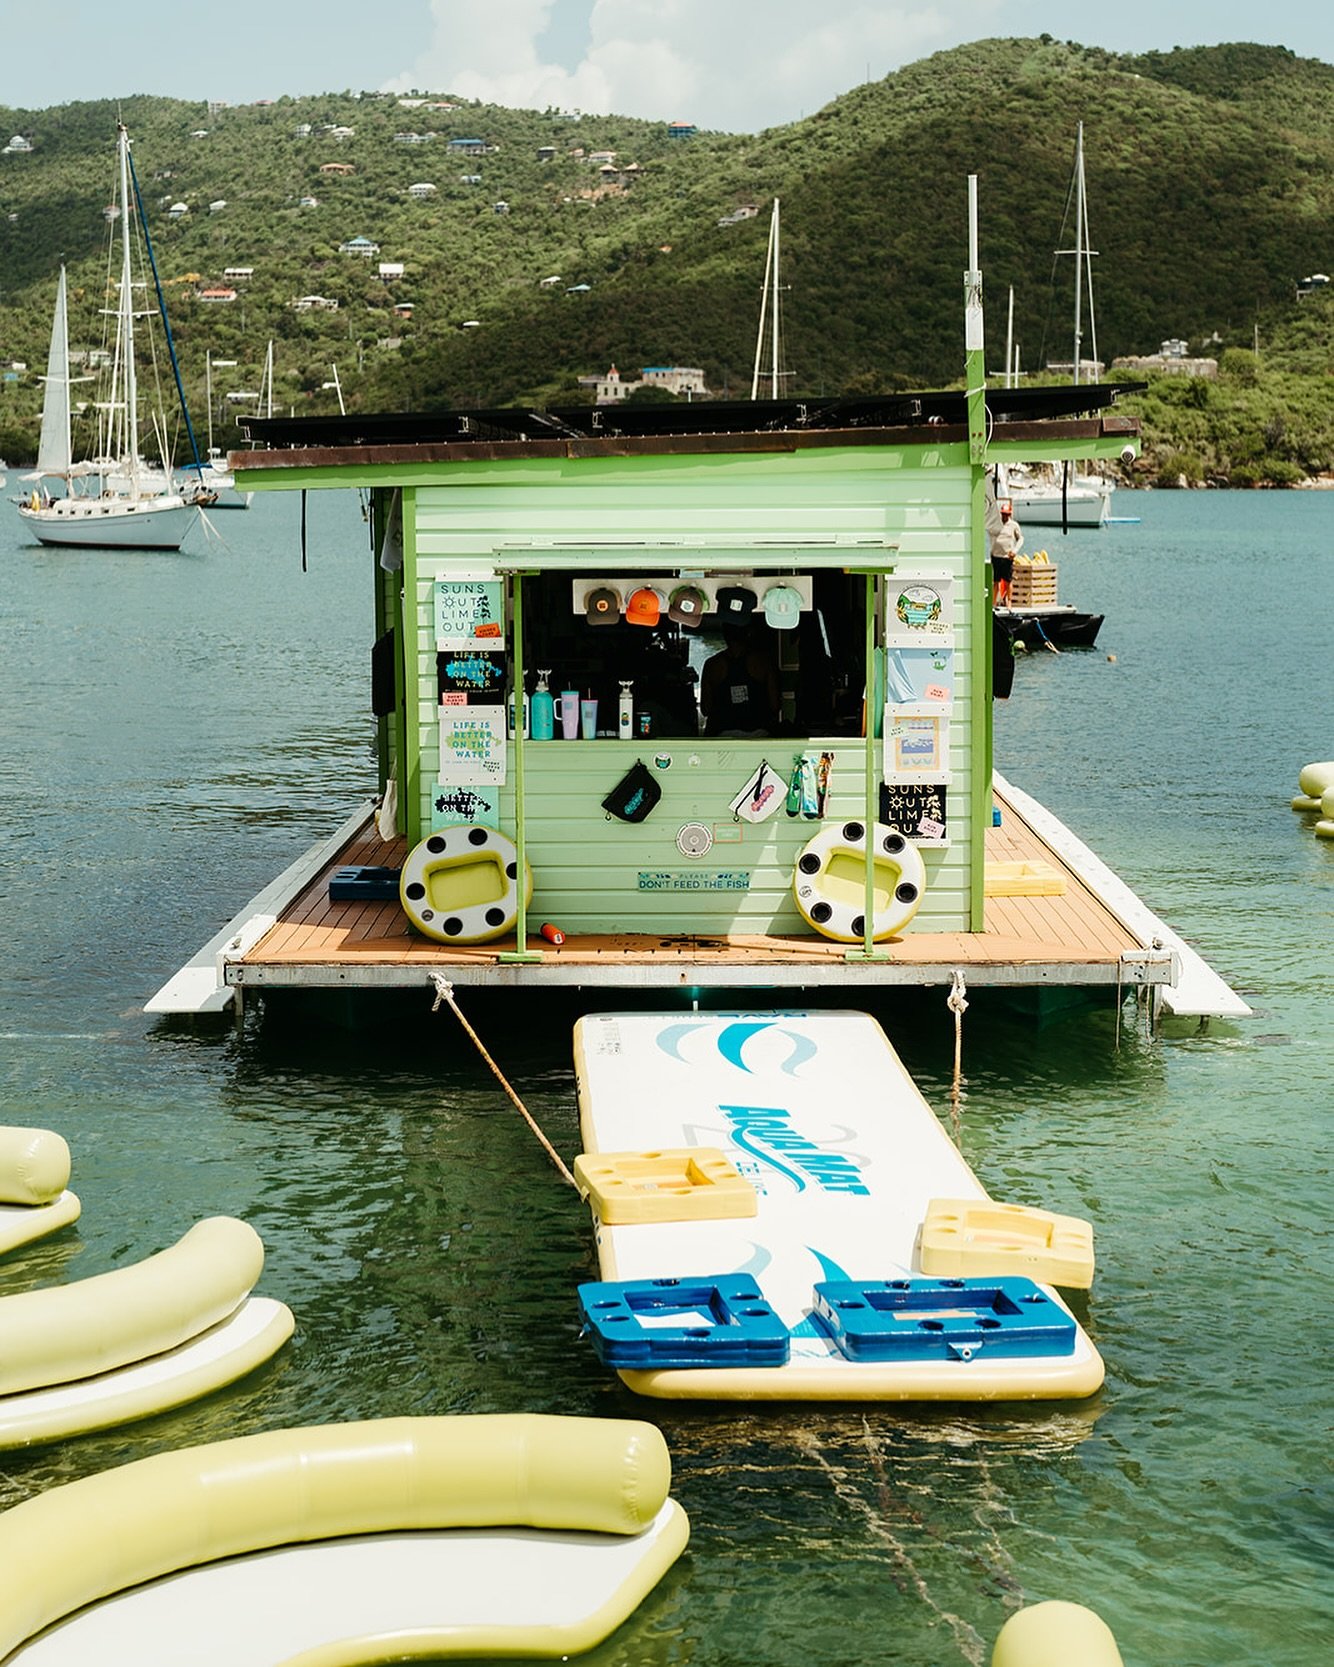 It&rsquo;s days like today we are happy we run on solar- ready for the weekend! ∕∕∕ OPEN Sunday - Friday &bull; 11:00am - 5:00pm [closed Saturday] 📸: @sarahbswan 
.
. 
. 
#LimeOut #LimeOutVi #CocktailsAndTacos #CoralBay #StJohn #USVirginIslands #USV